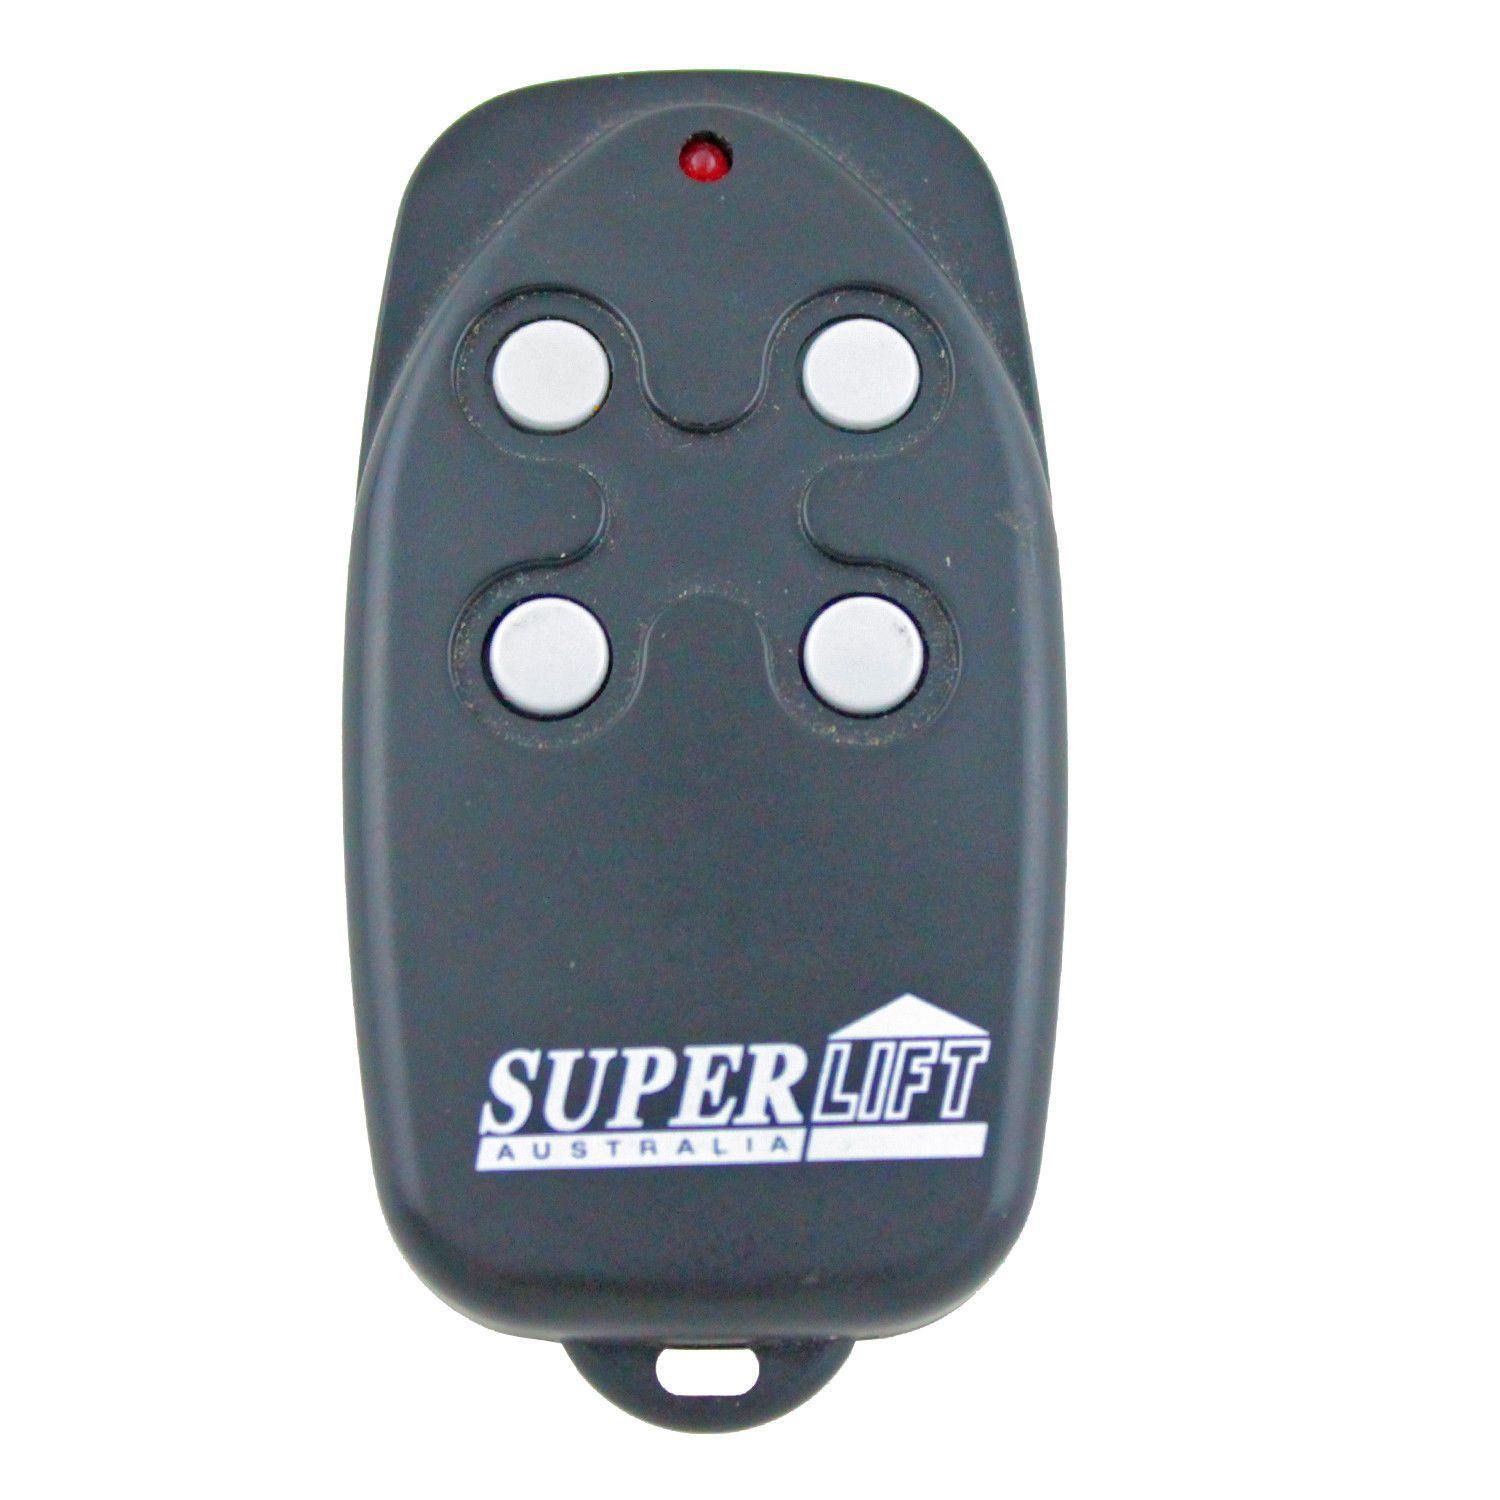 Superlift Remote - China Air Conditioner Remotes :: Cheapest AC Remote Solutions